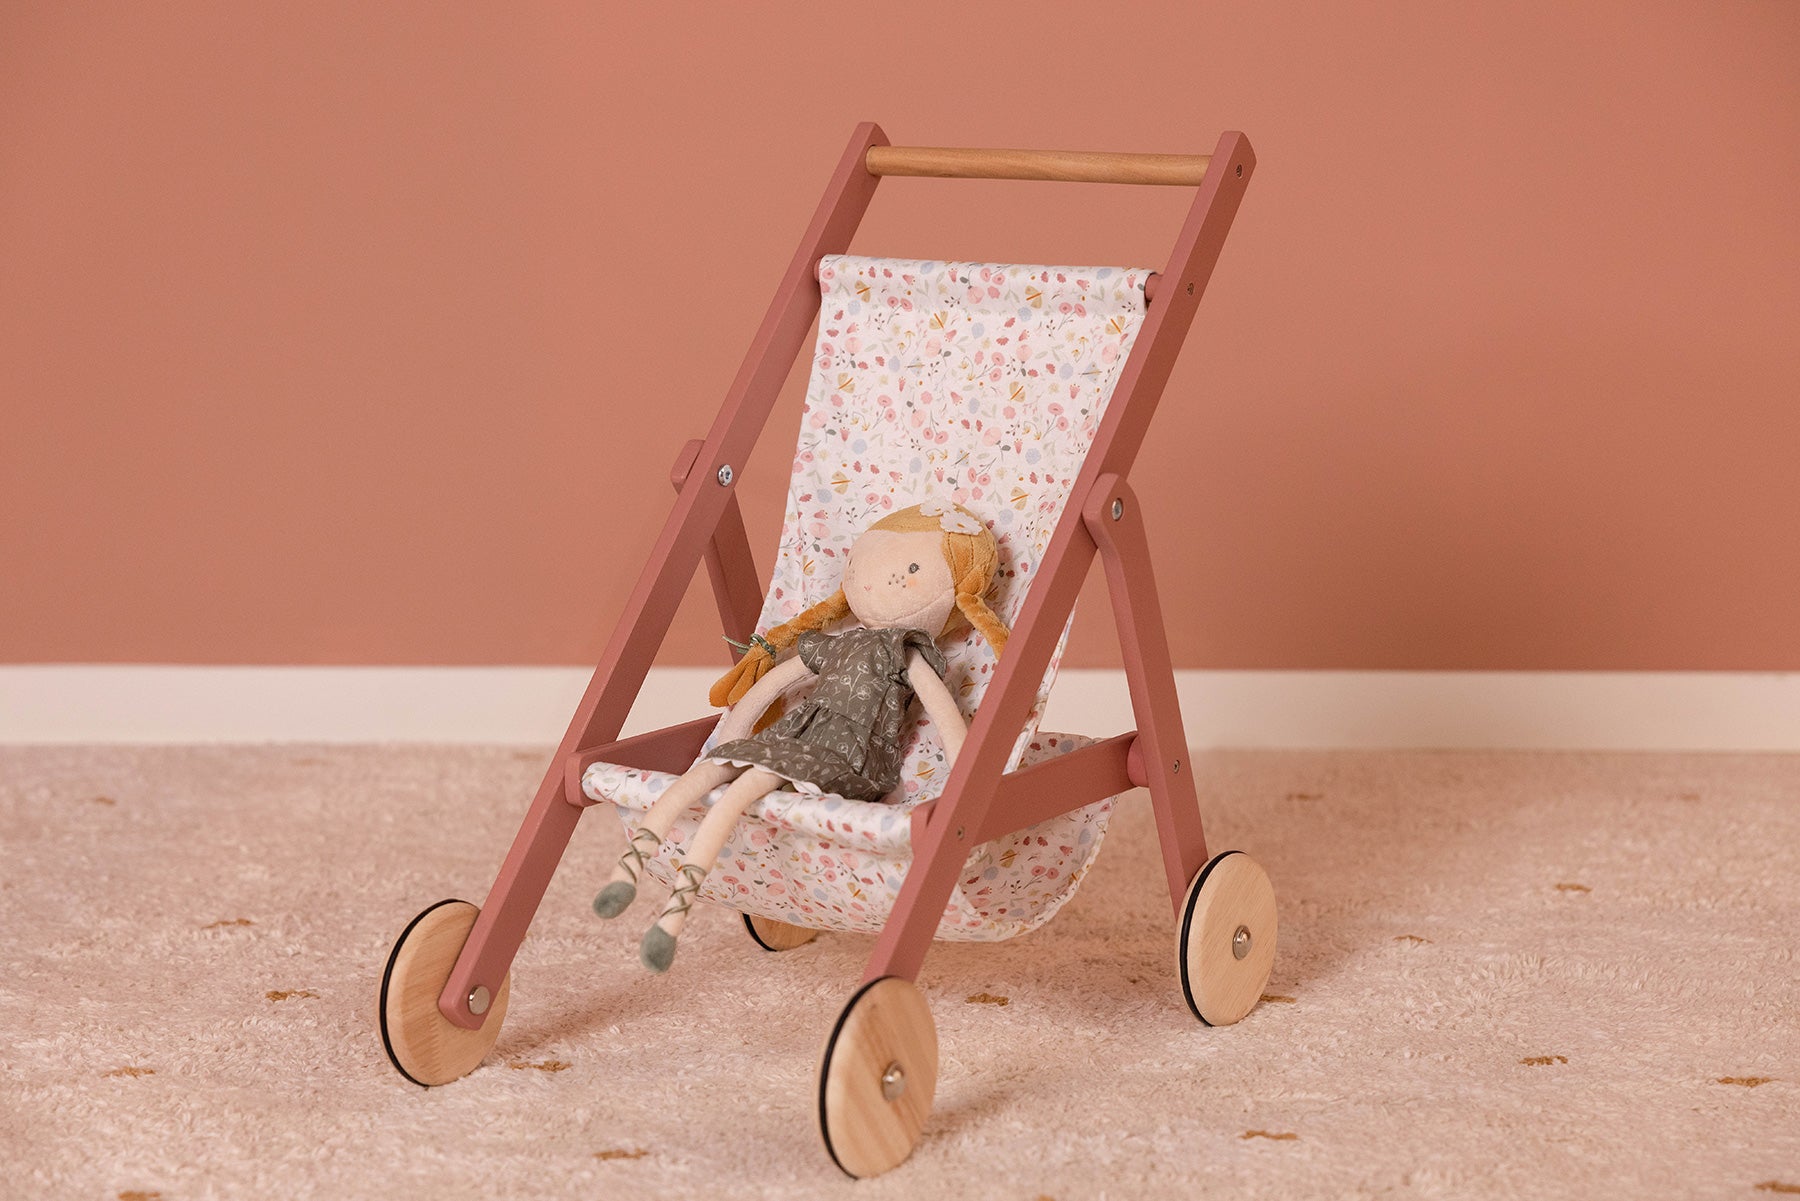 Dolls, Dolls Prams, Beds, Chairs and Dolls Houses